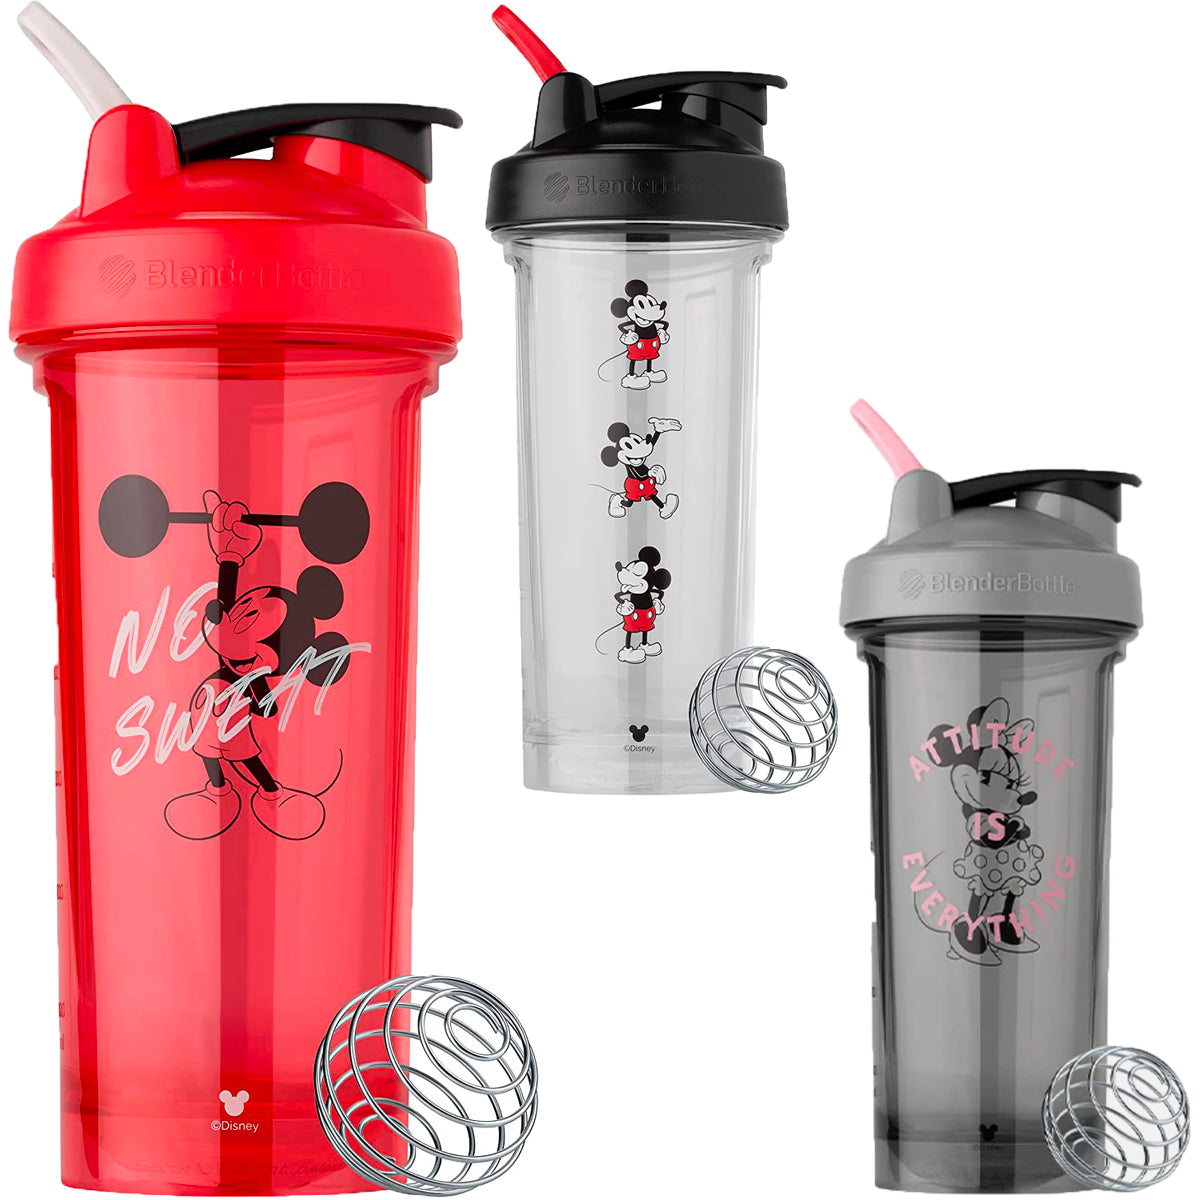 BlenderBottle - Introducing the Mickey and Minnie Mouse